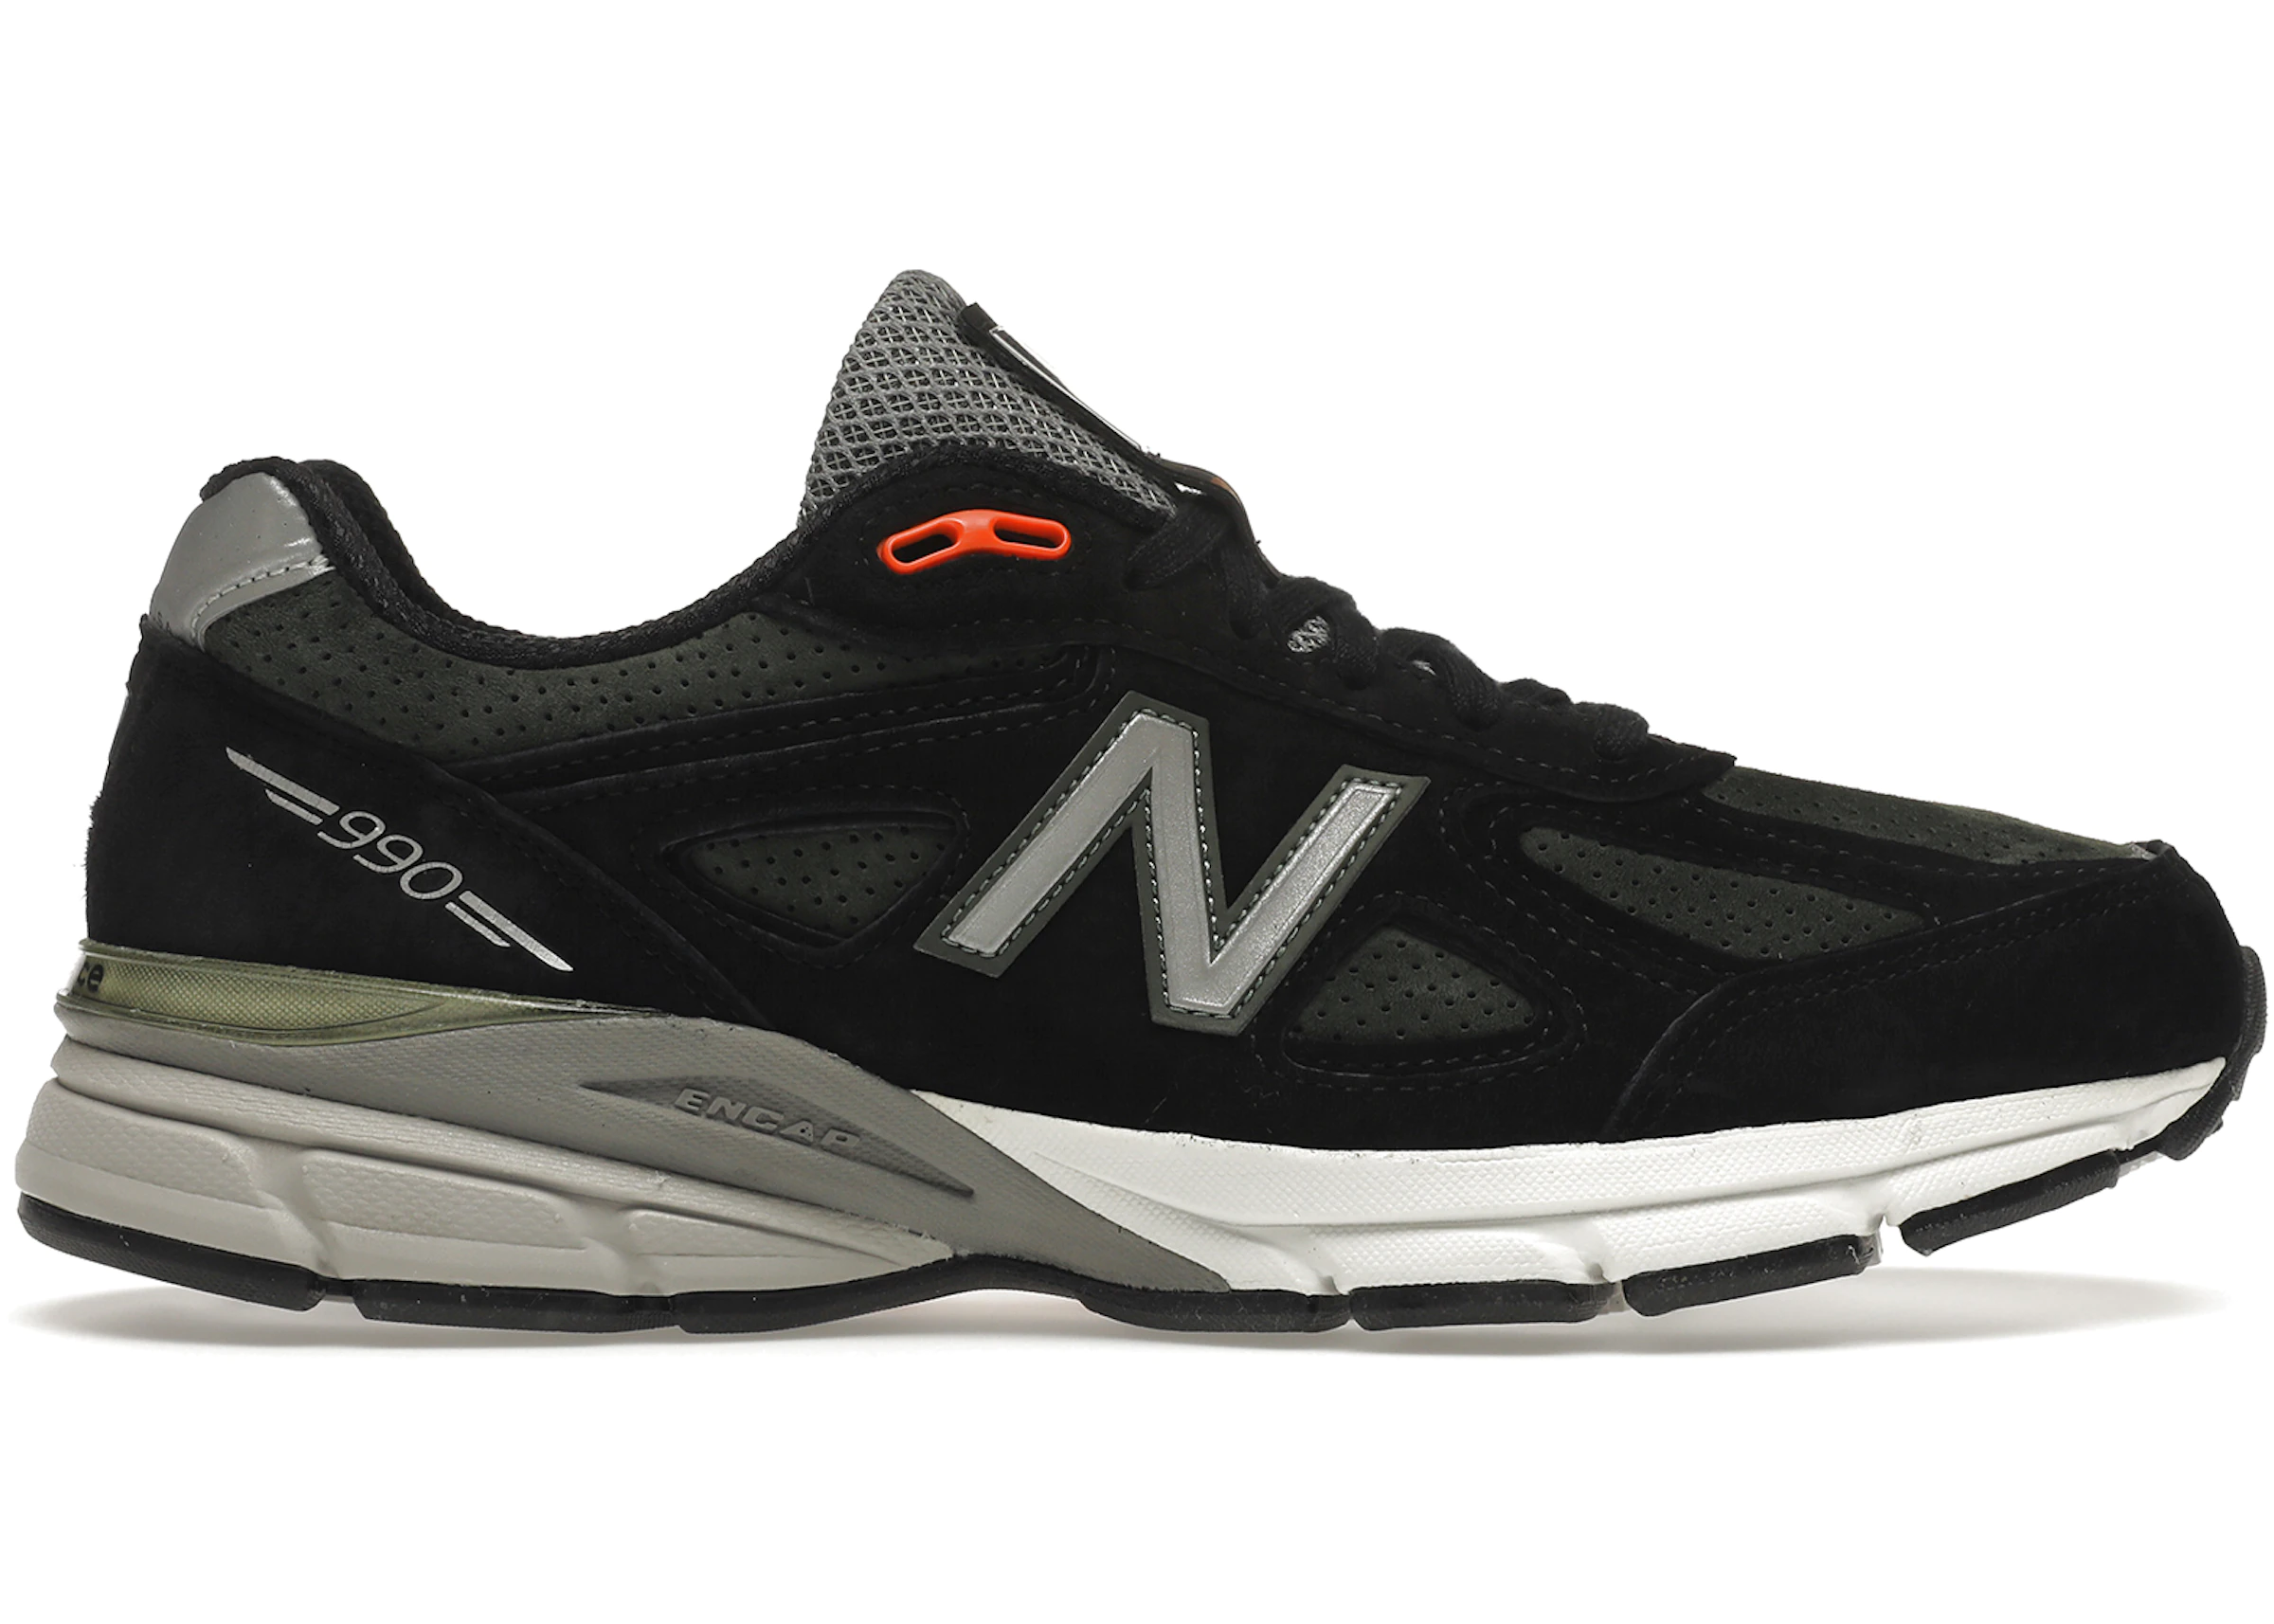 Buy New Balance 990v4 Shoes New Sneakers StockX | lupon.gov.ph